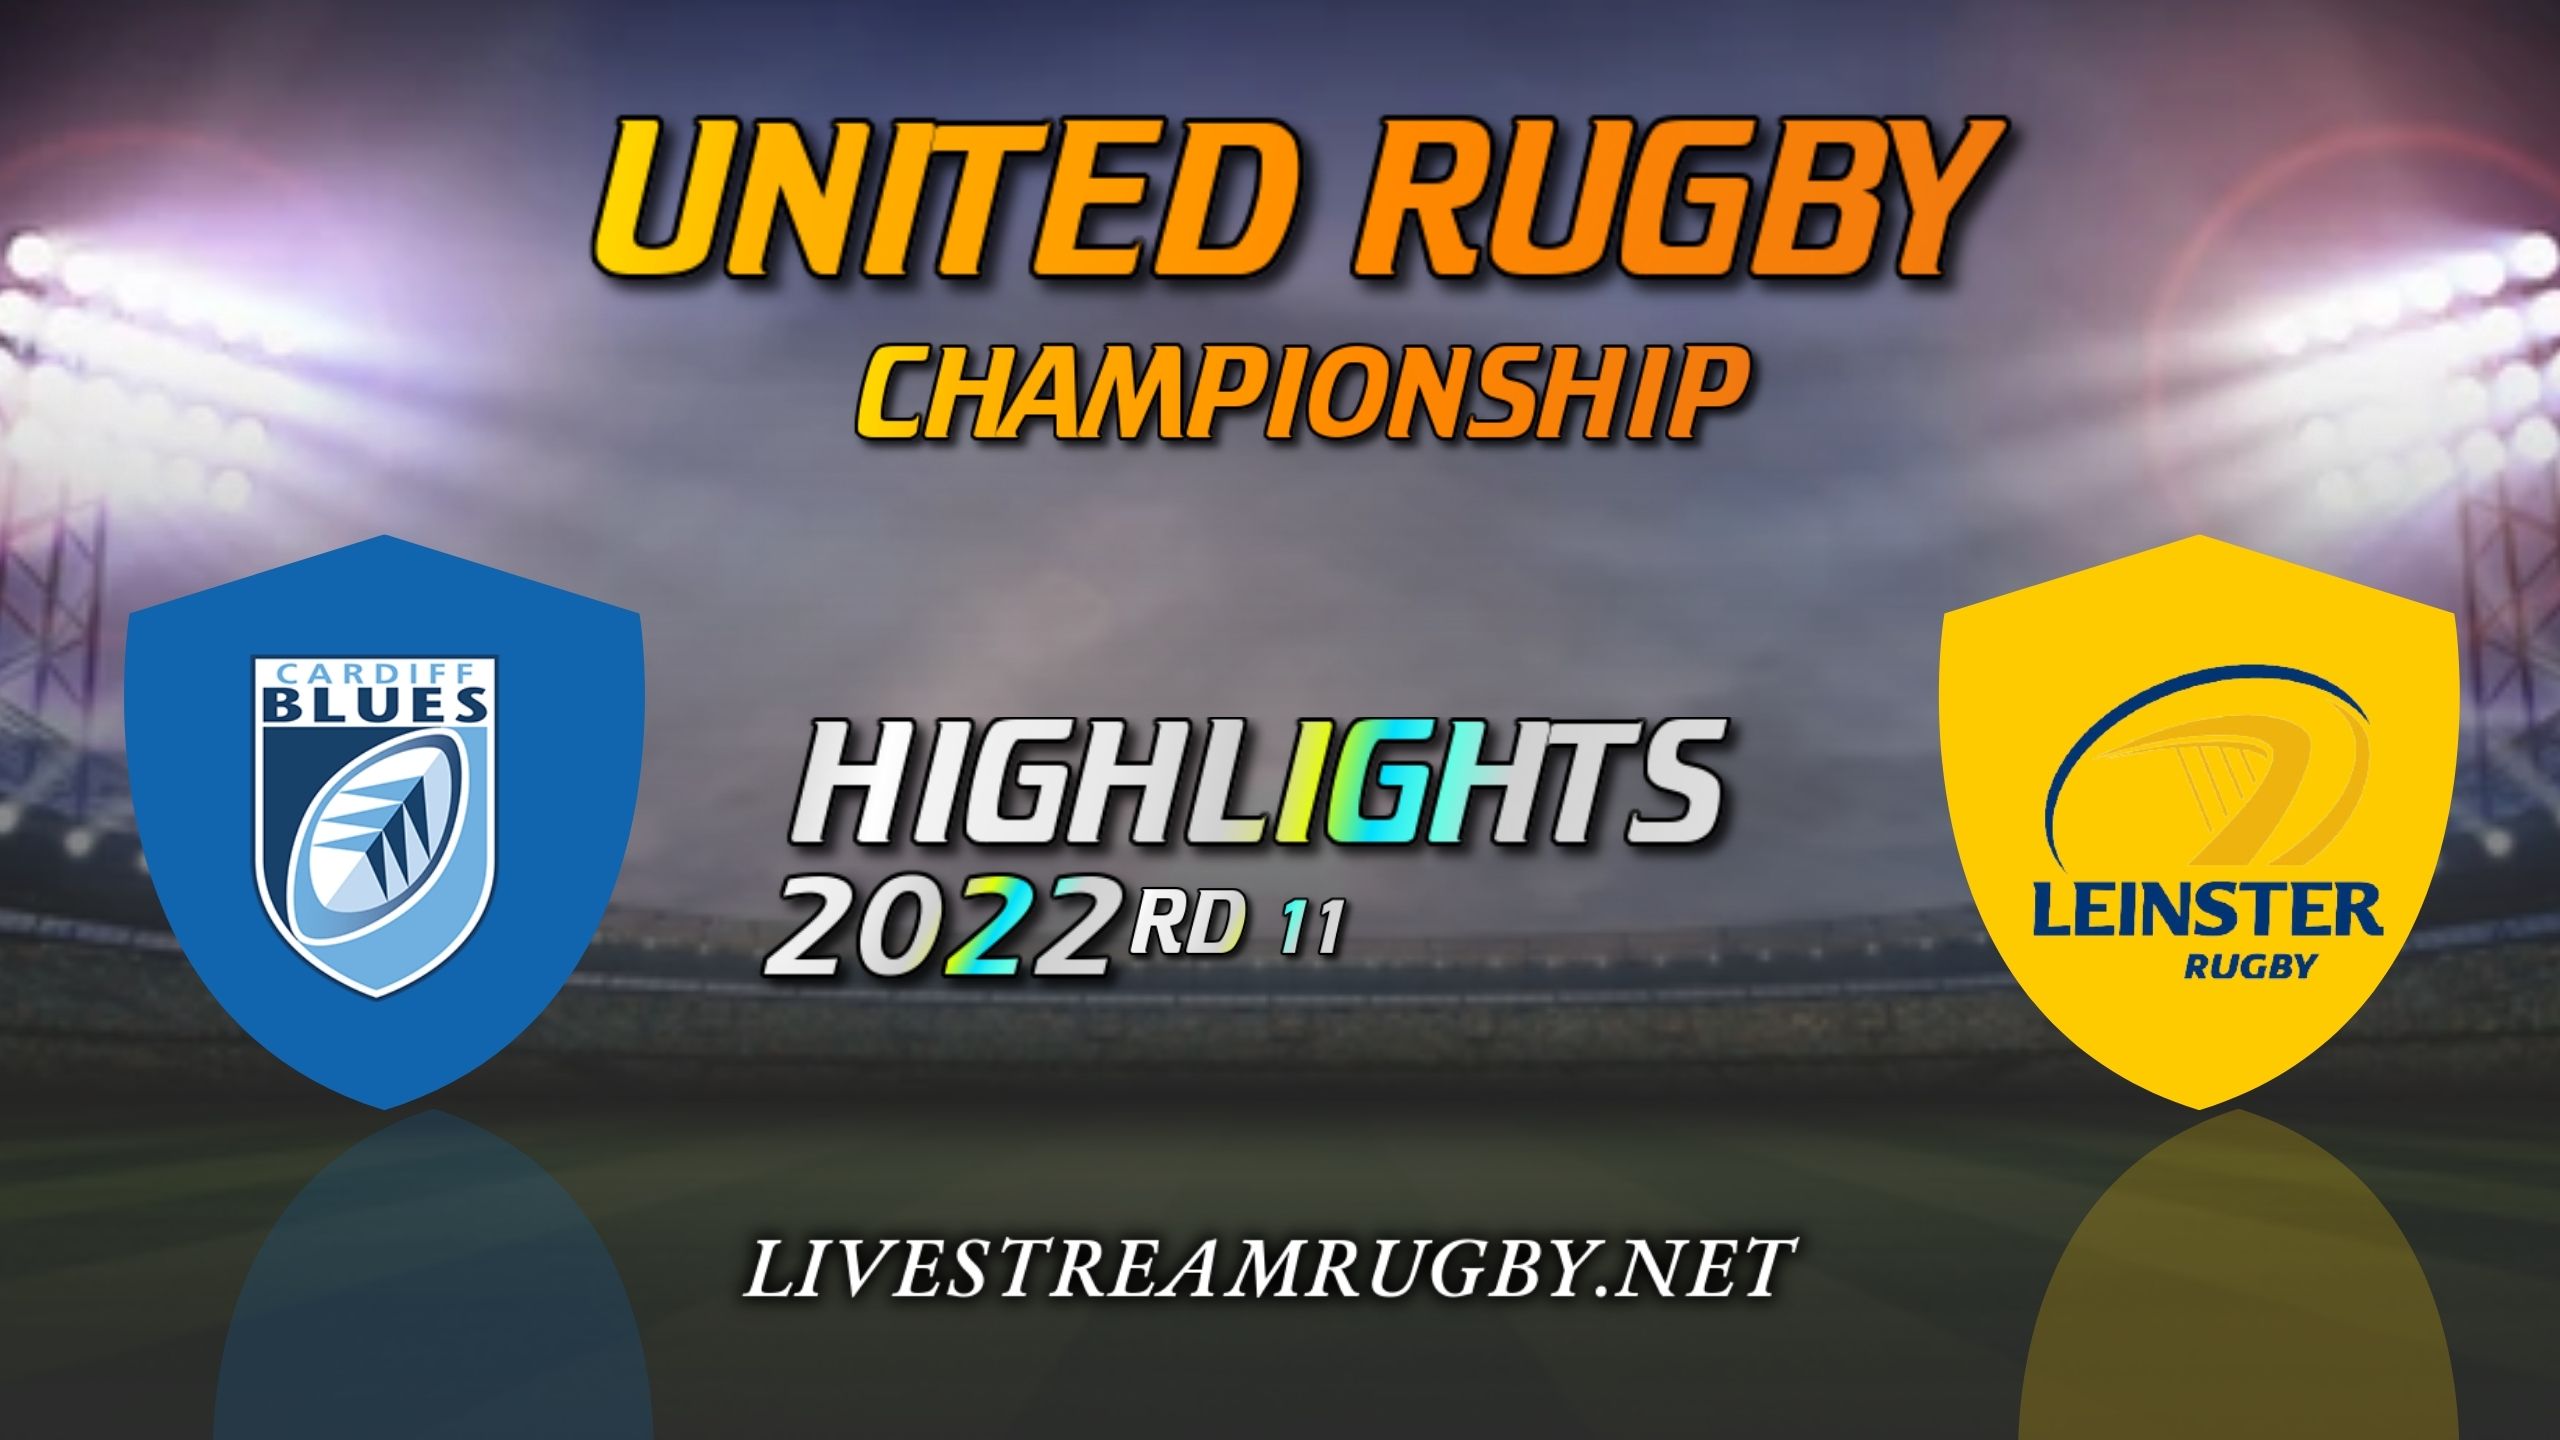 Cardiff Rugby Vs Leinster Highlights 2022 Rd 11 United Rugby